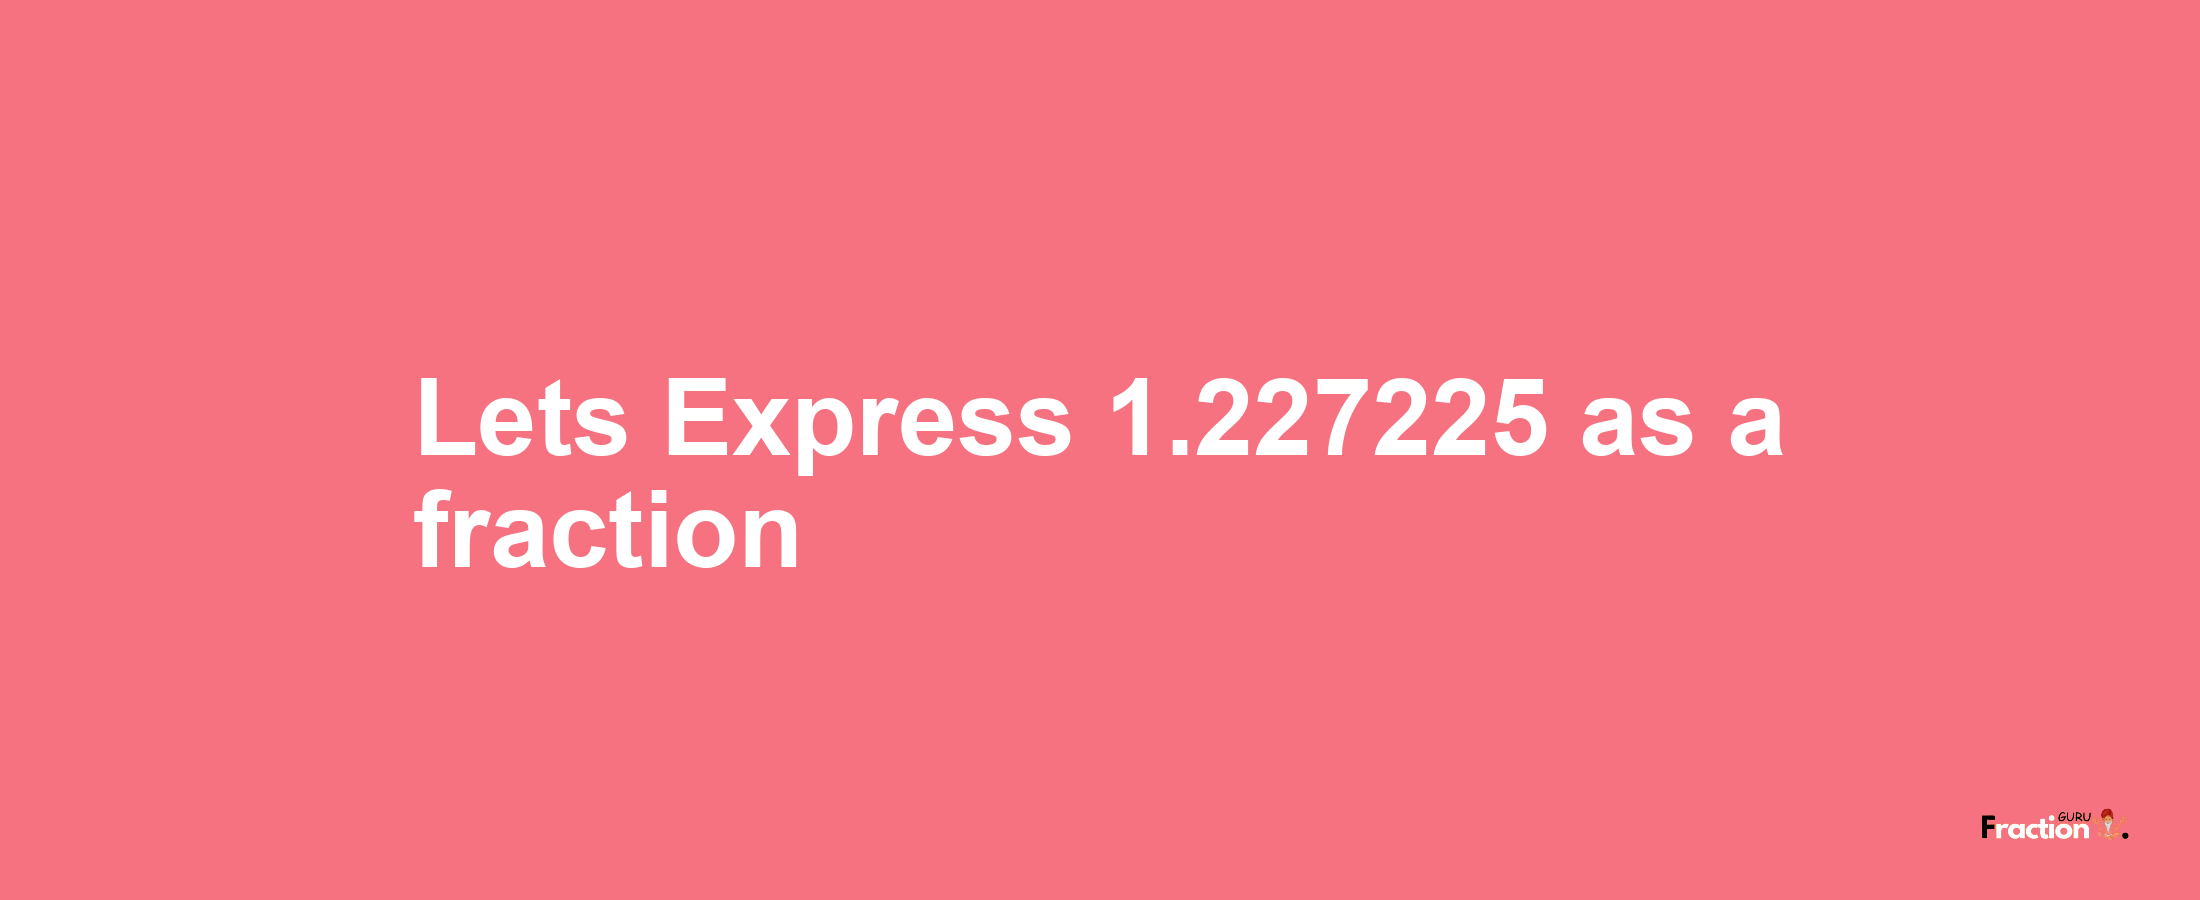 Lets Express 1.227225 as afraction